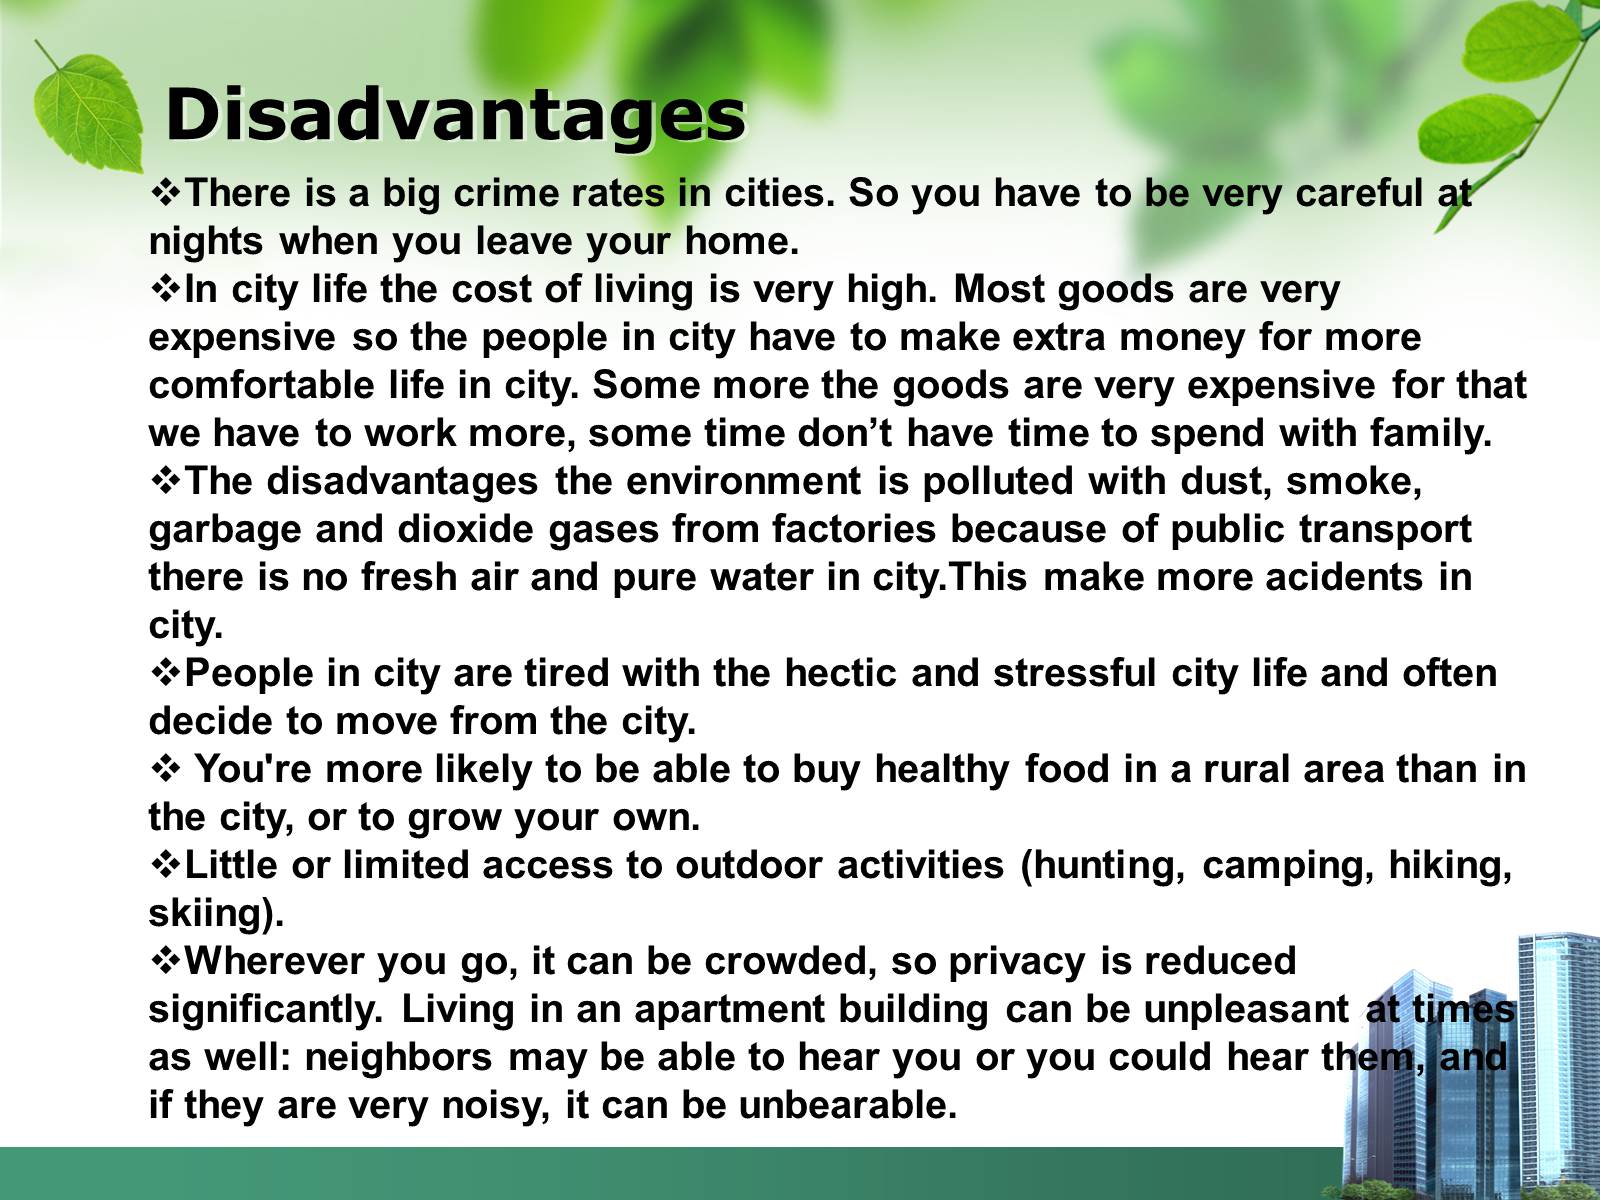 City and village advantages and disadvantages. City Life advantages and disadvantages. Темы для эссе по английскому advantages and disadvantages. Темы эссе advantages and disadvantages. Disadvantages of Living in the City.